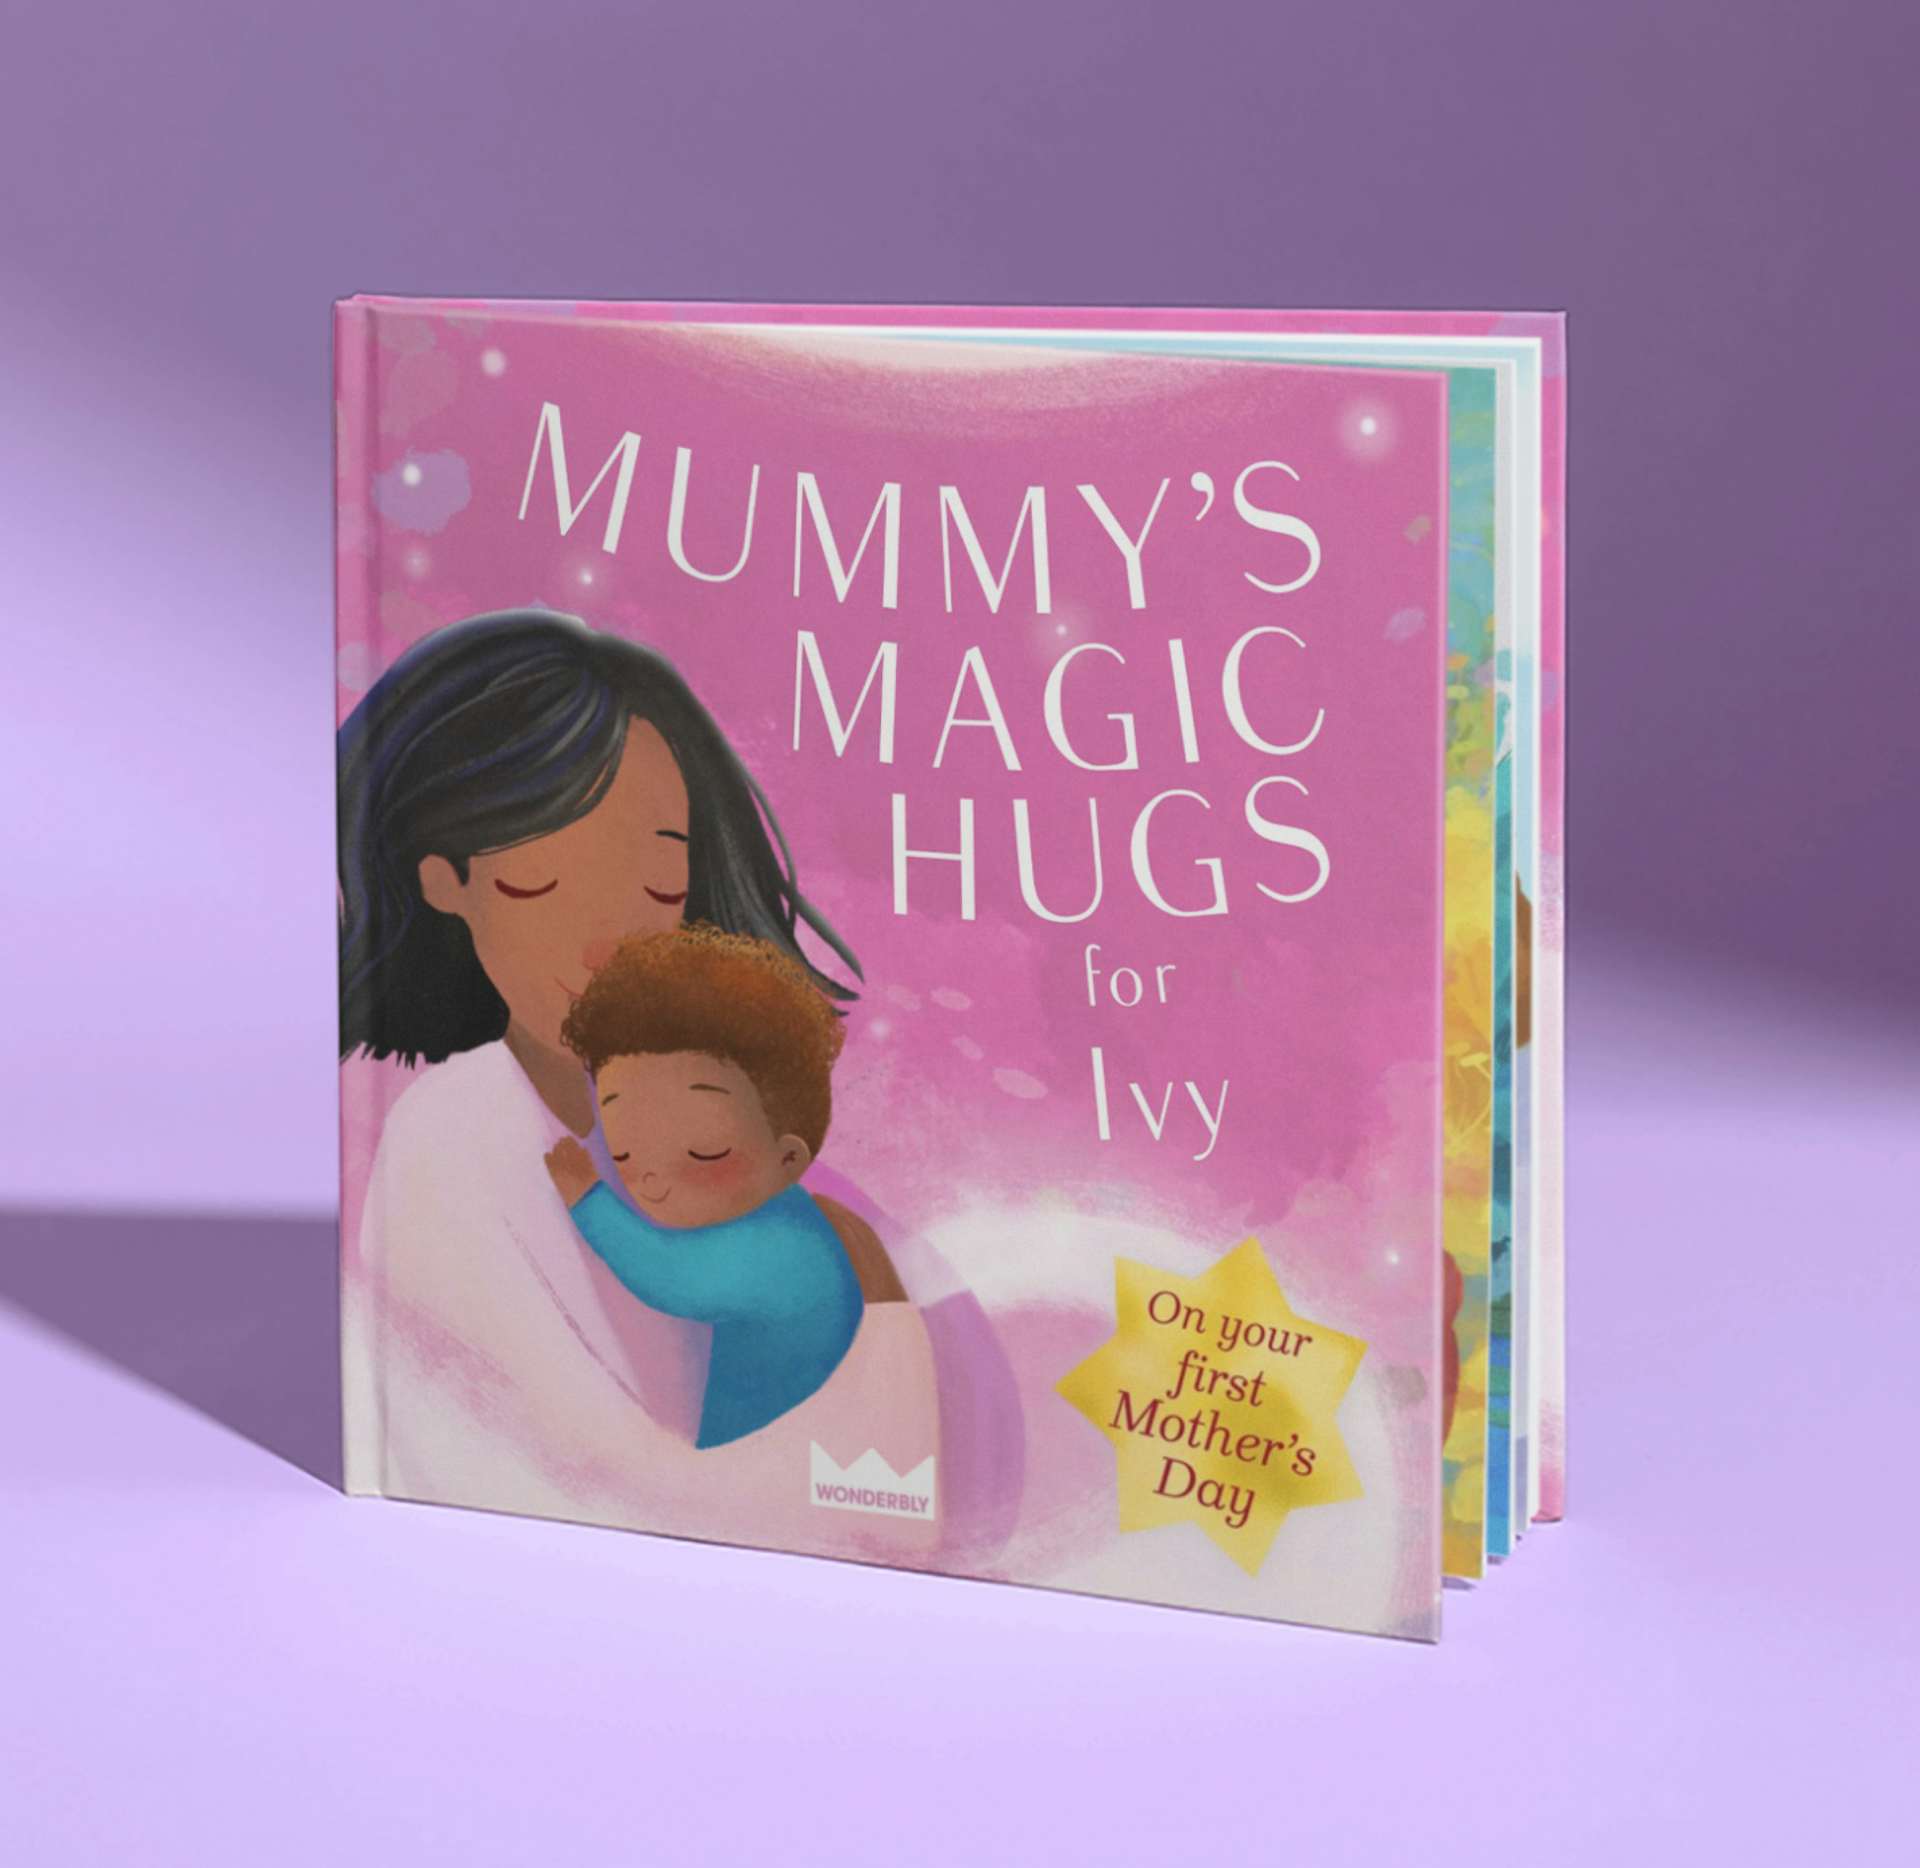 mummy's magic hugs pink cover with special 'first mother's day' badge